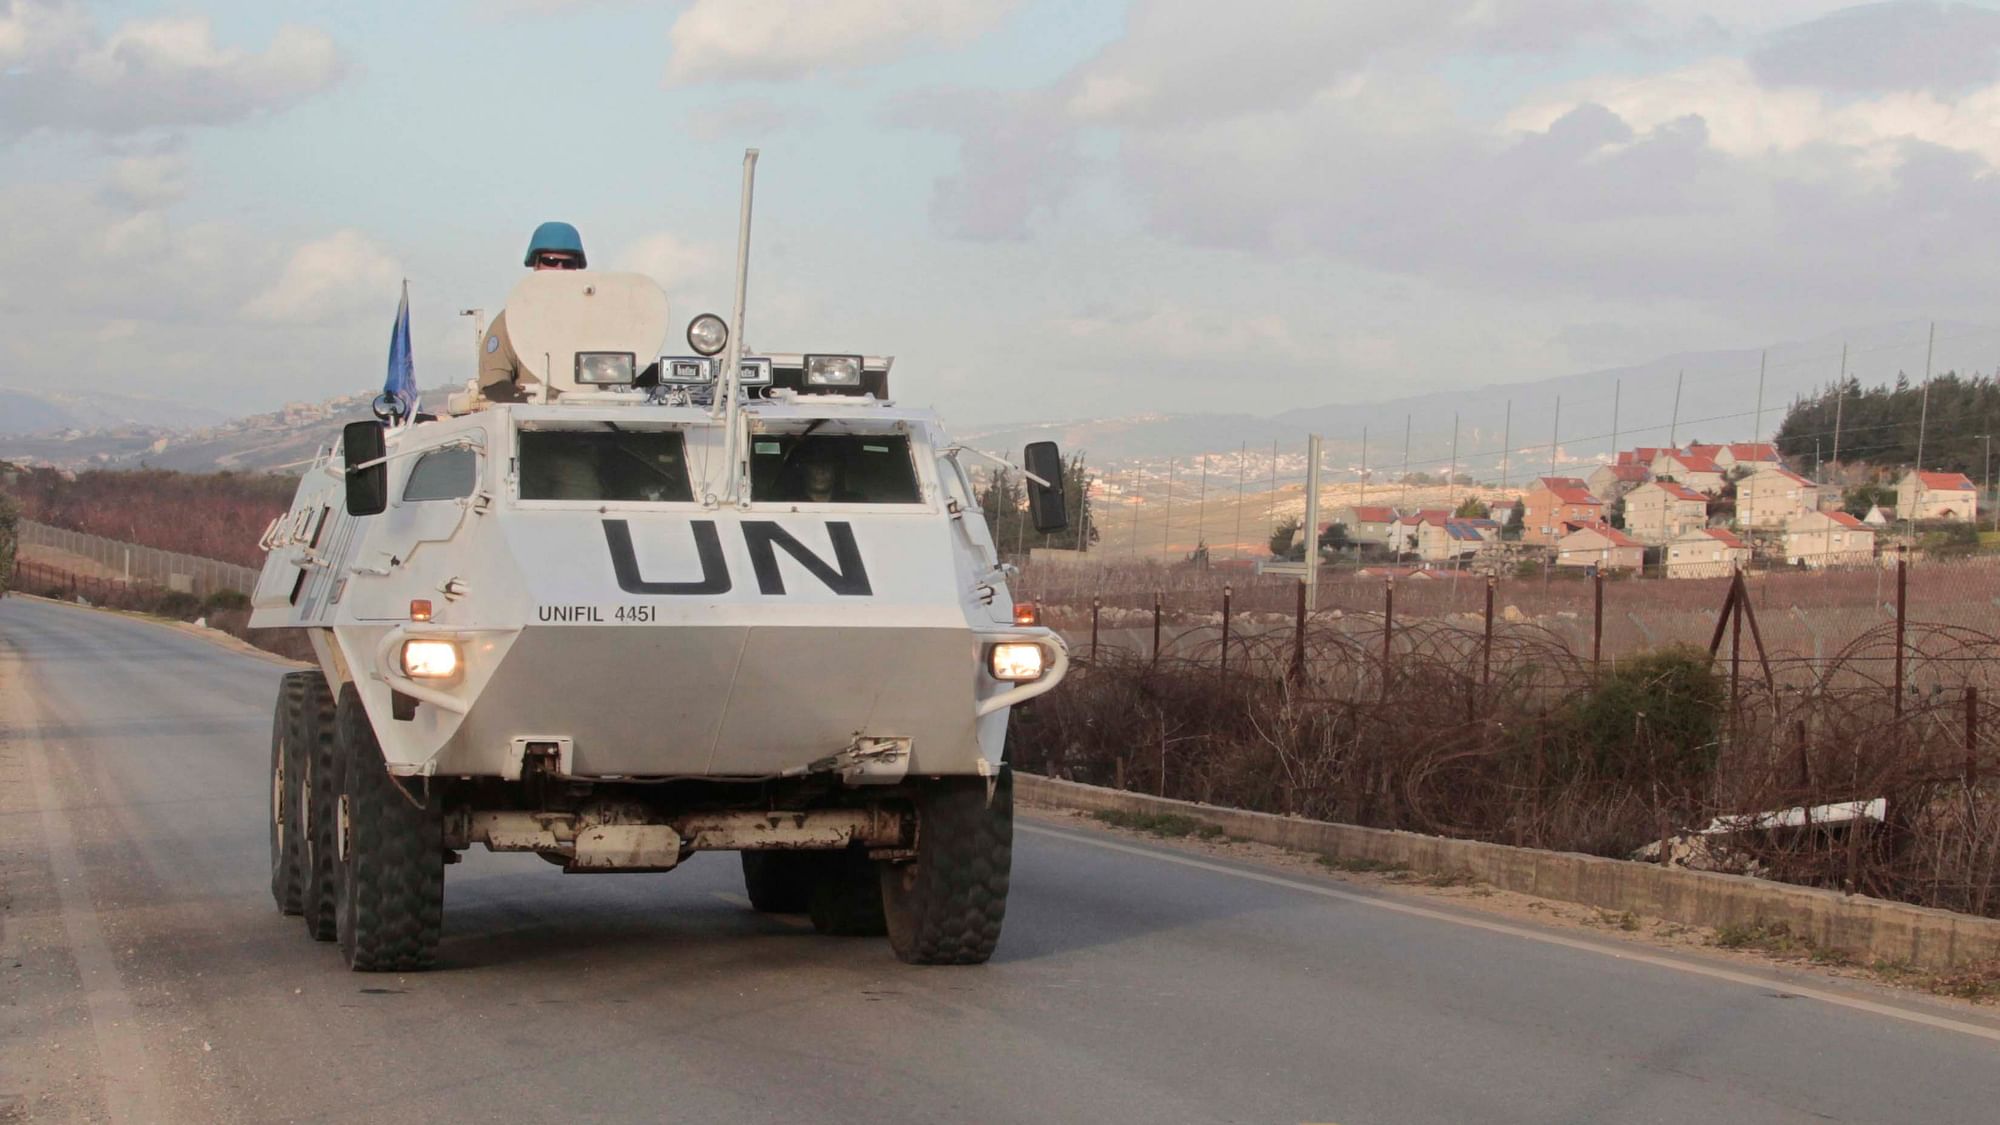  UN peacekeepers of the United Nations Interim Force in Lebanon (UNIFIL) patrol in Kfar Kila village in south Lebanon, near the border with Israel. (Photo: Reuters) 